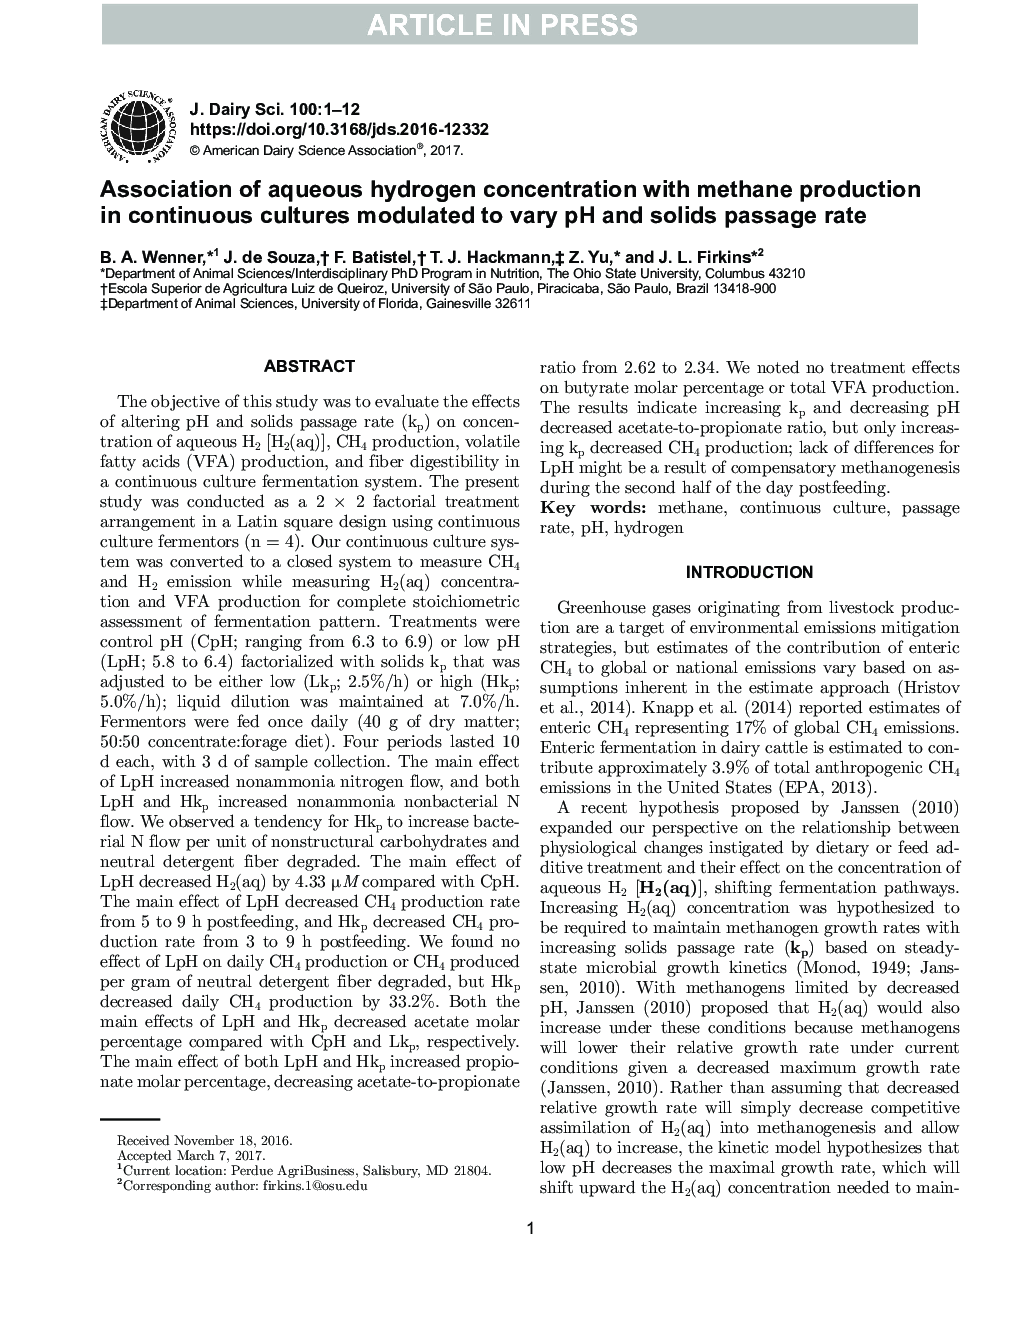 Association of aqueous hydrogen concentration with methane production in continuous cultures modulated to vary pH and solids passage rate